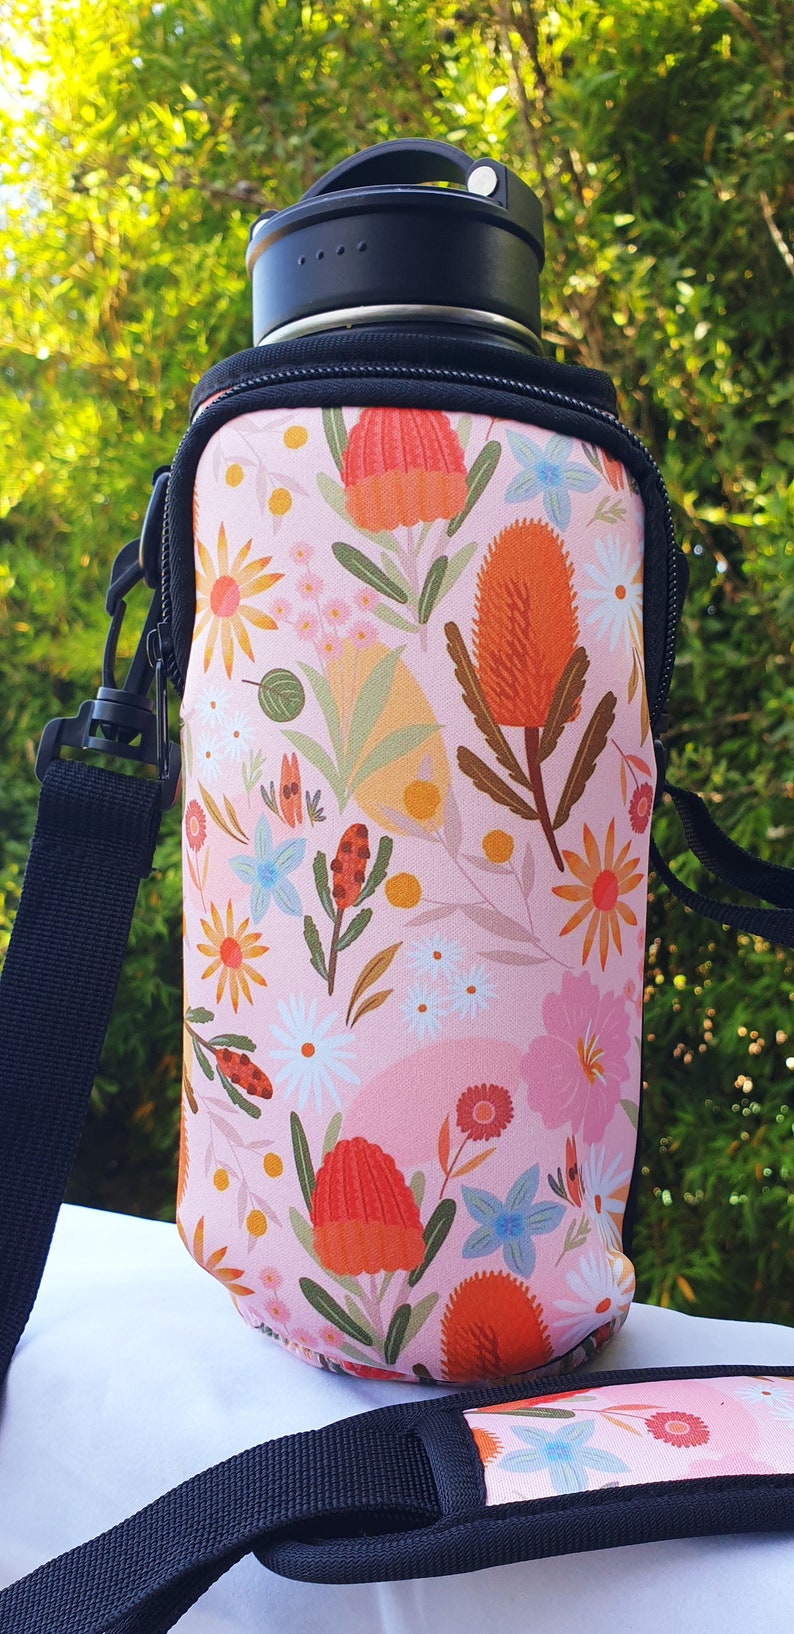 New XL Size Water bottle carry bags with a phone pocket adjustable strap zipper on pocket fits large phones Washable Work Beach. image 3